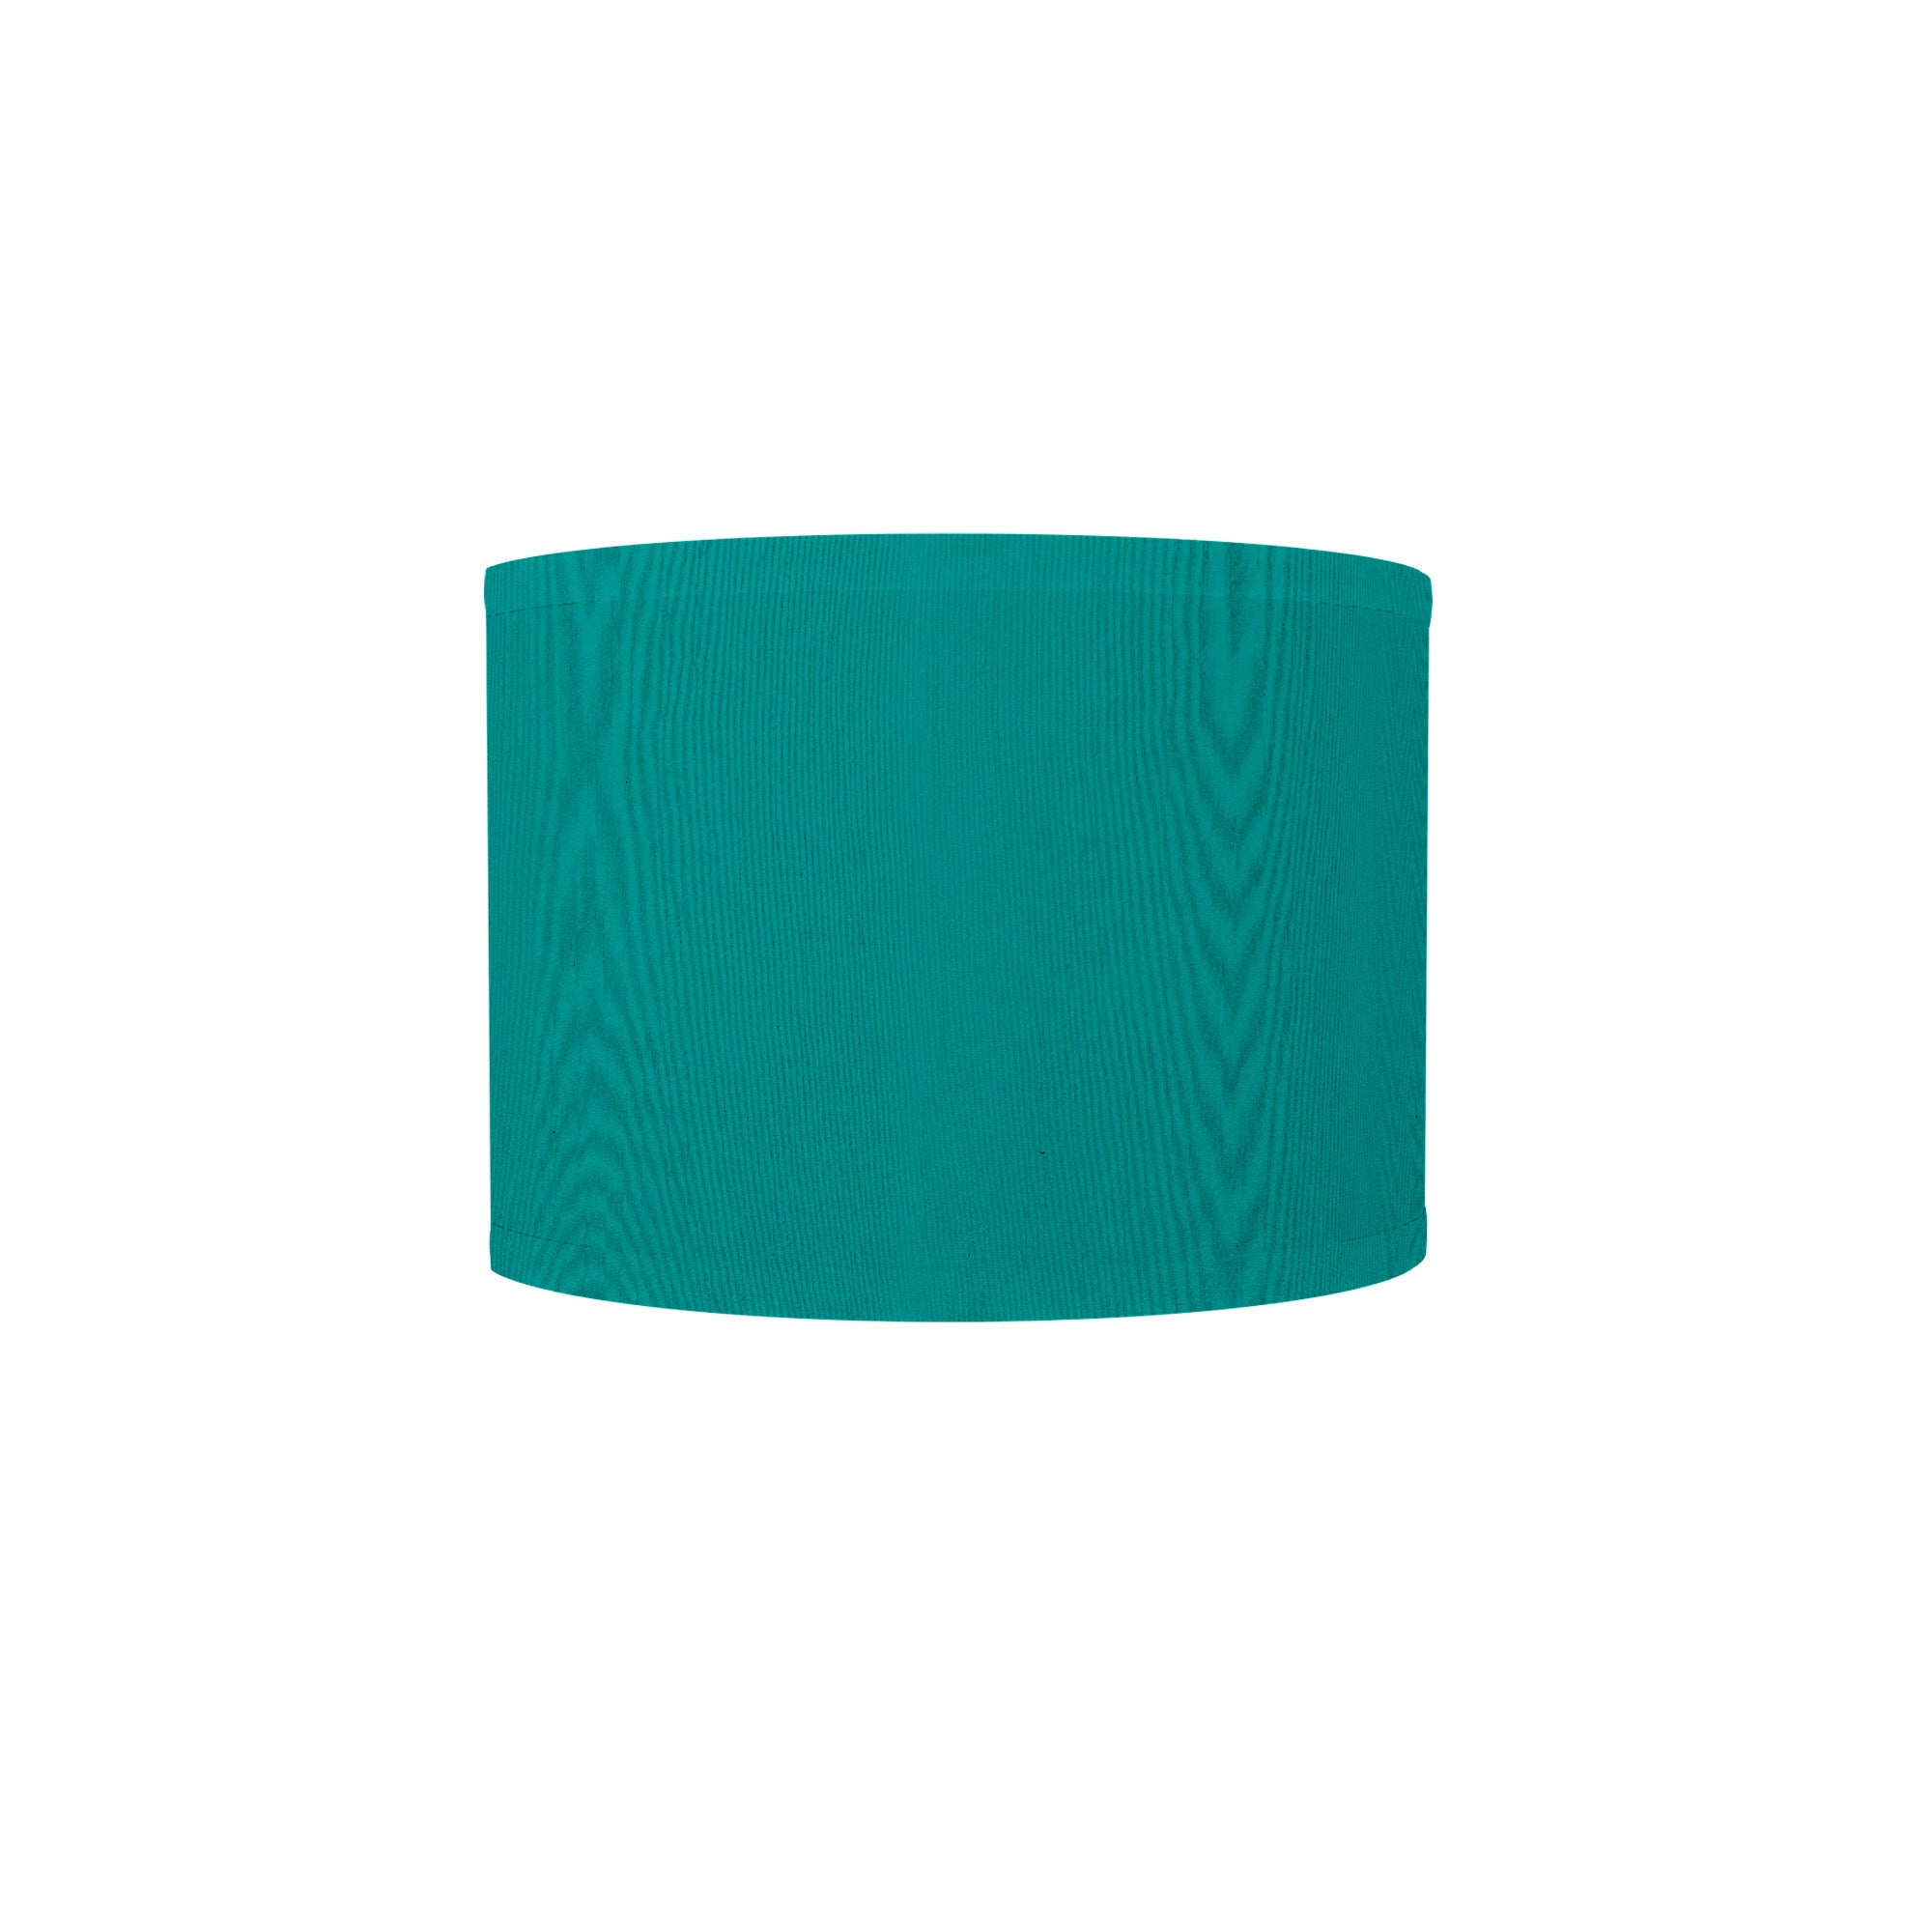 The Bryce Wall Sconce from Seascape Fixtures with a silk shade in turquoise color.